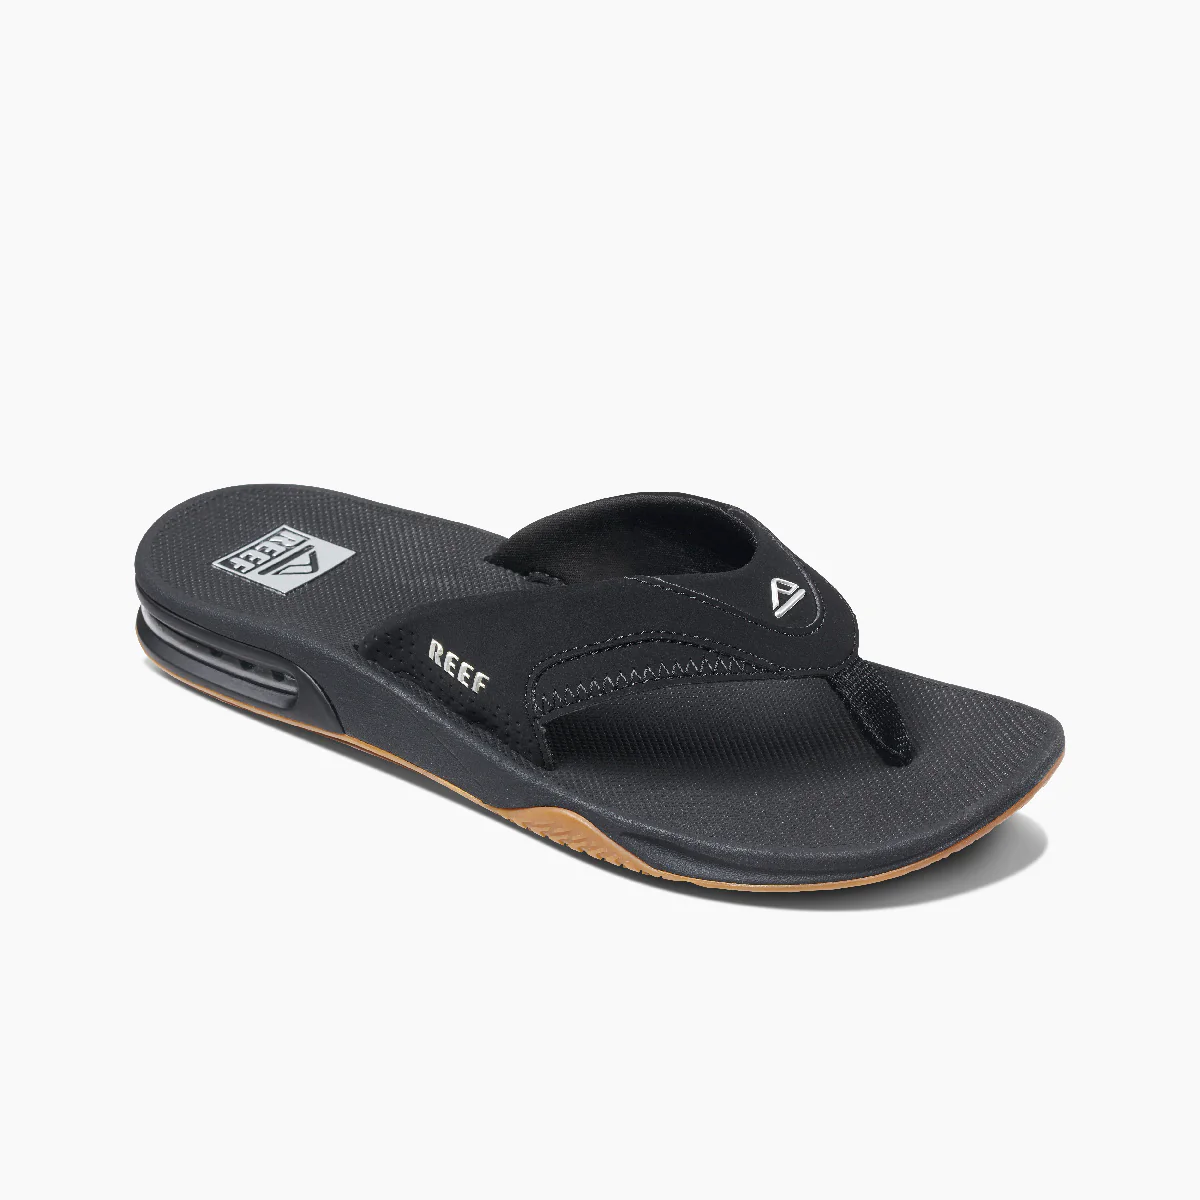 Mens Fanning flip flops in all black angle view